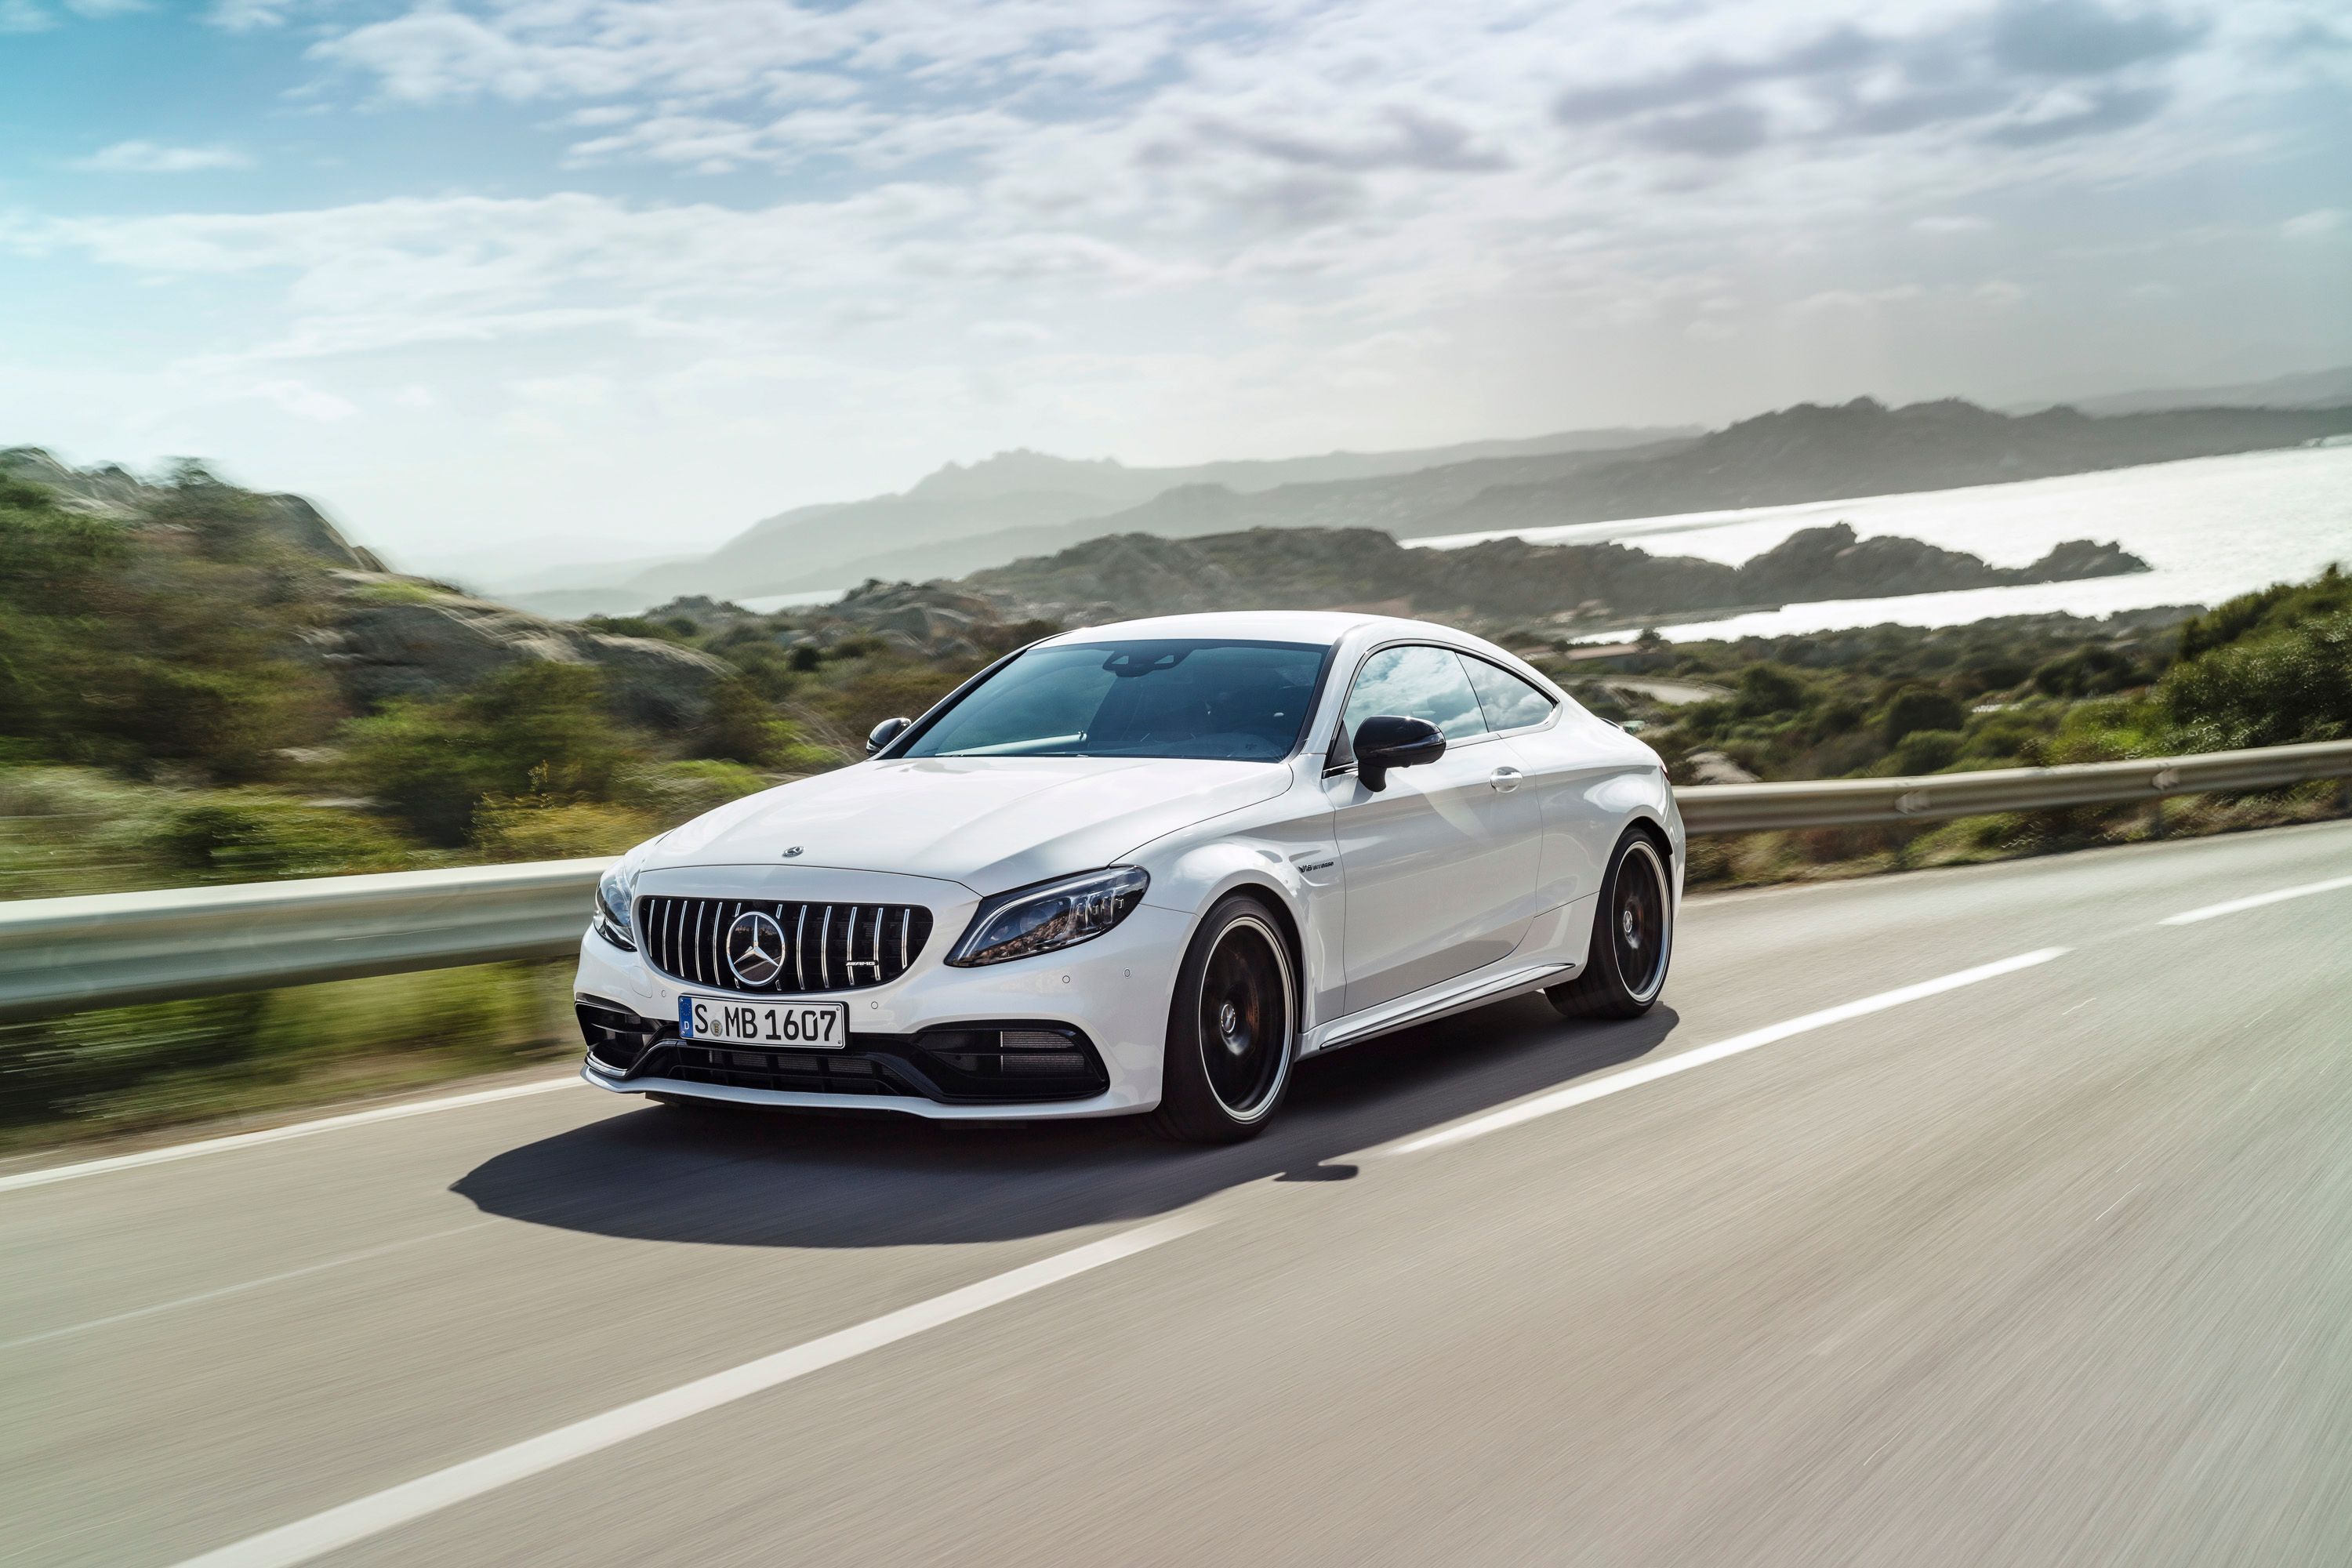 2019 Mercedes-AMG C 63 Coupe